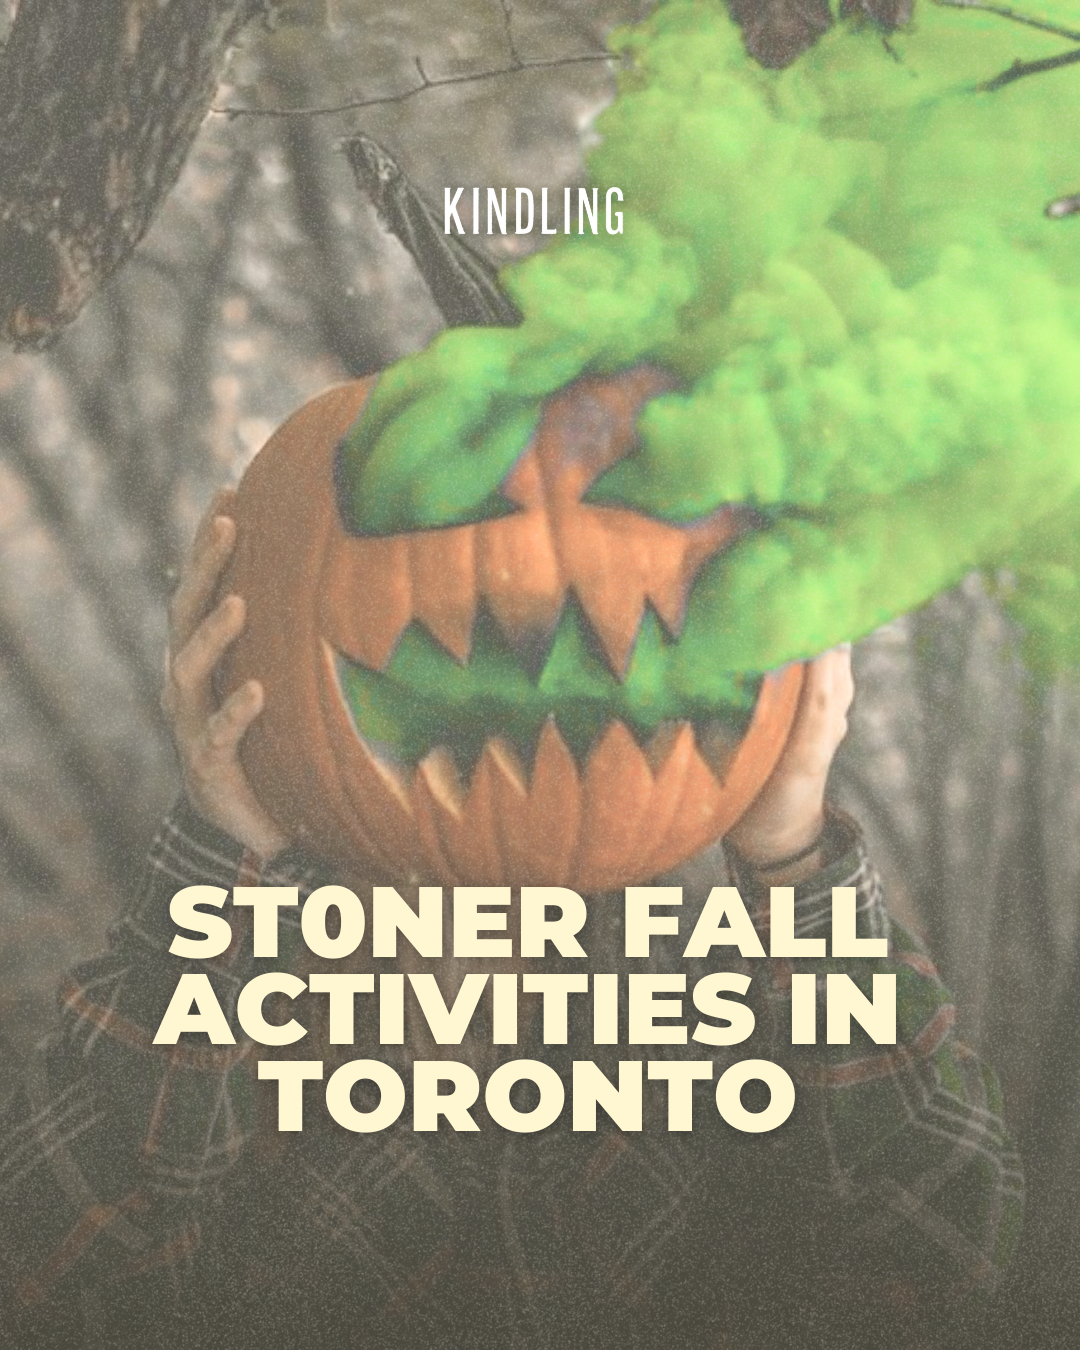 Your Guide to Stoner Fall Activities in Toronto